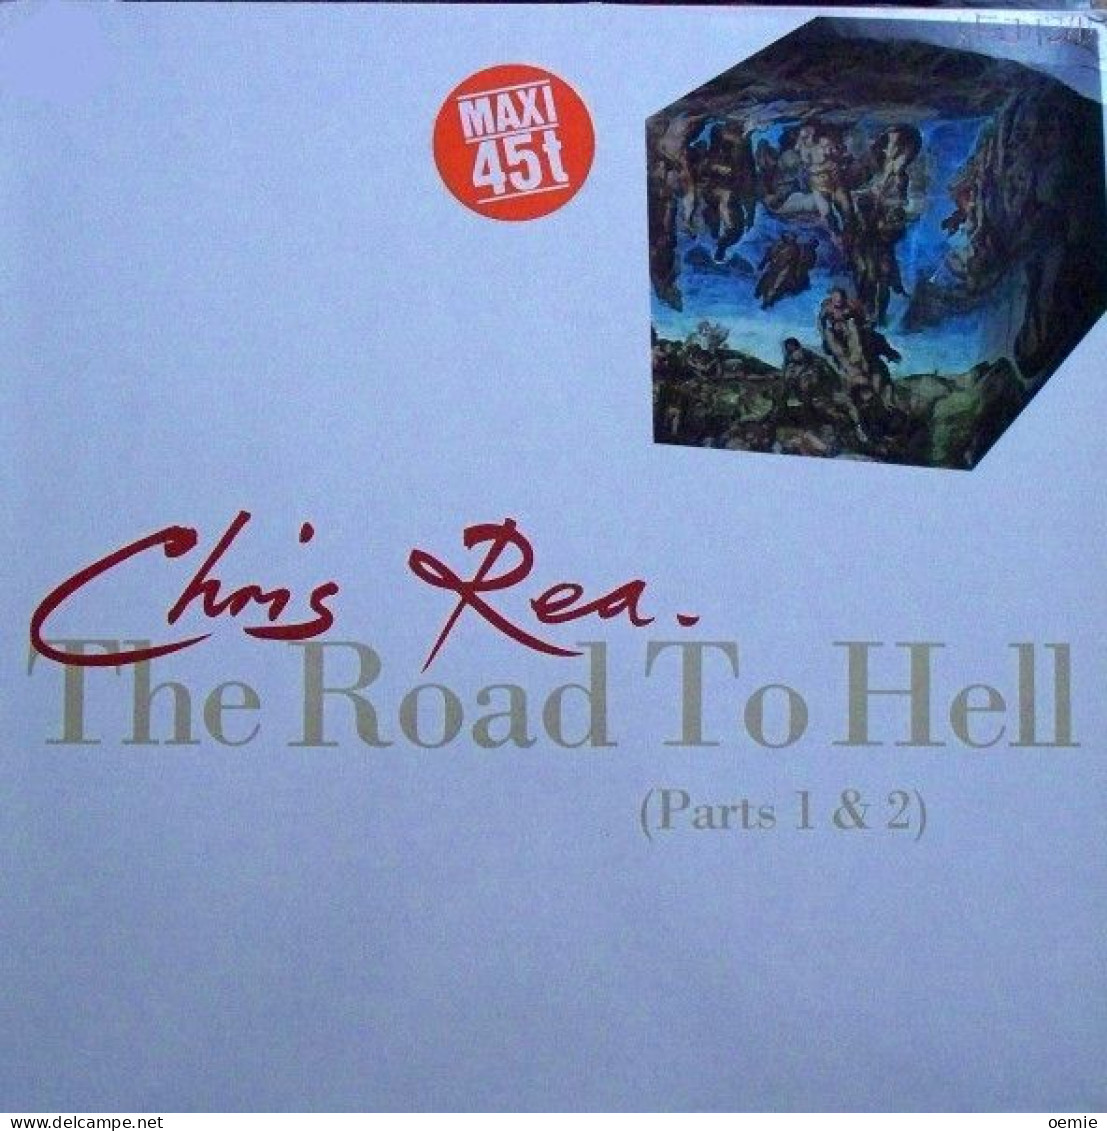 CHRIS REA  THE ROAD TO HELL   PART 1&2 - 45 Rpm - Maxi-Single